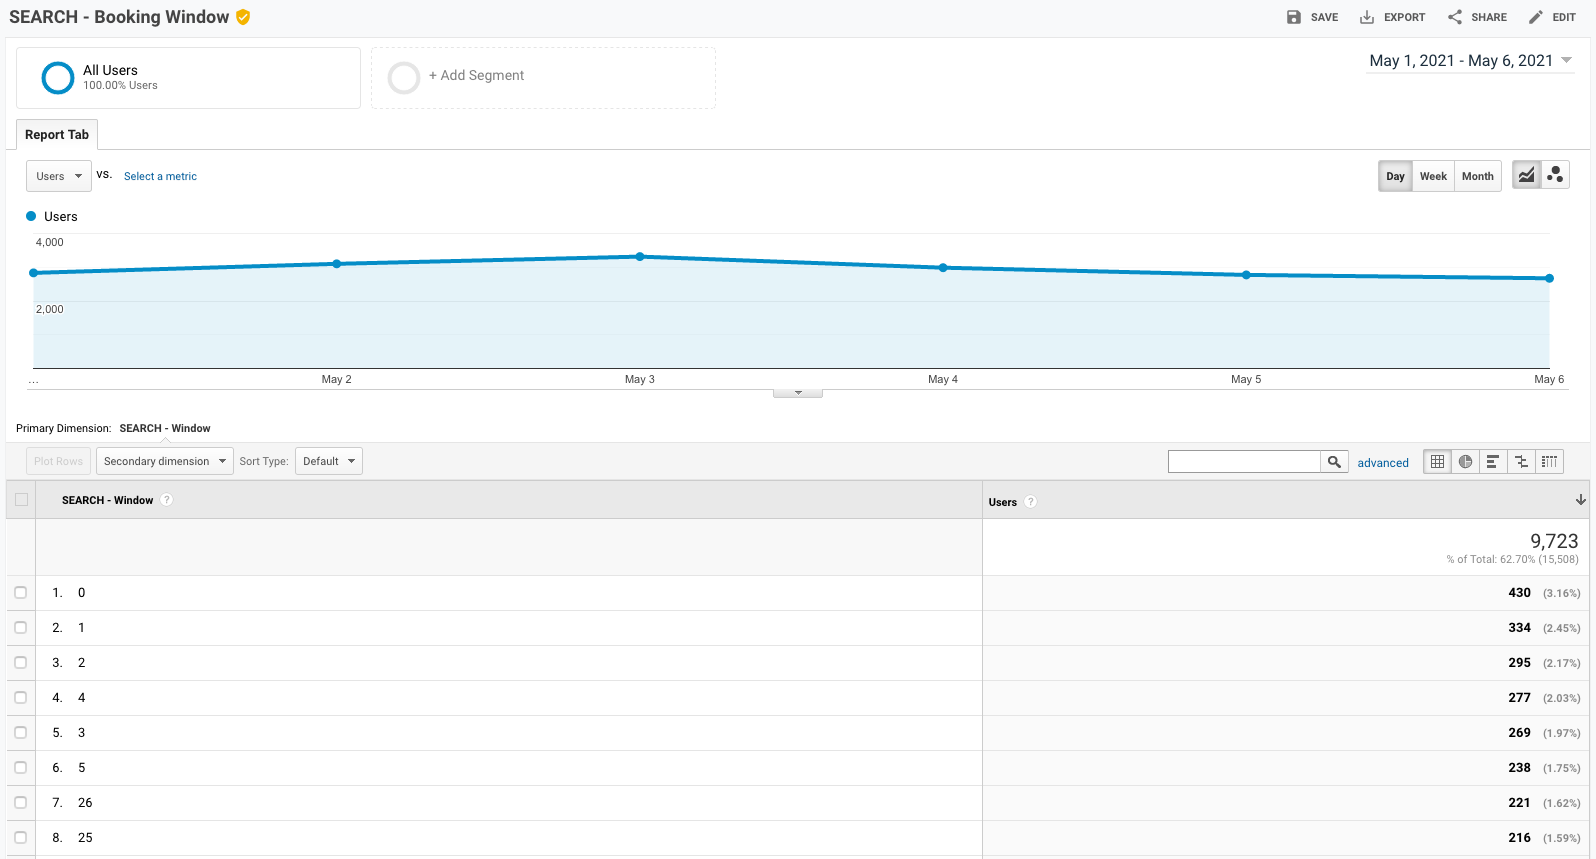 Search Booking Window Analytics Report